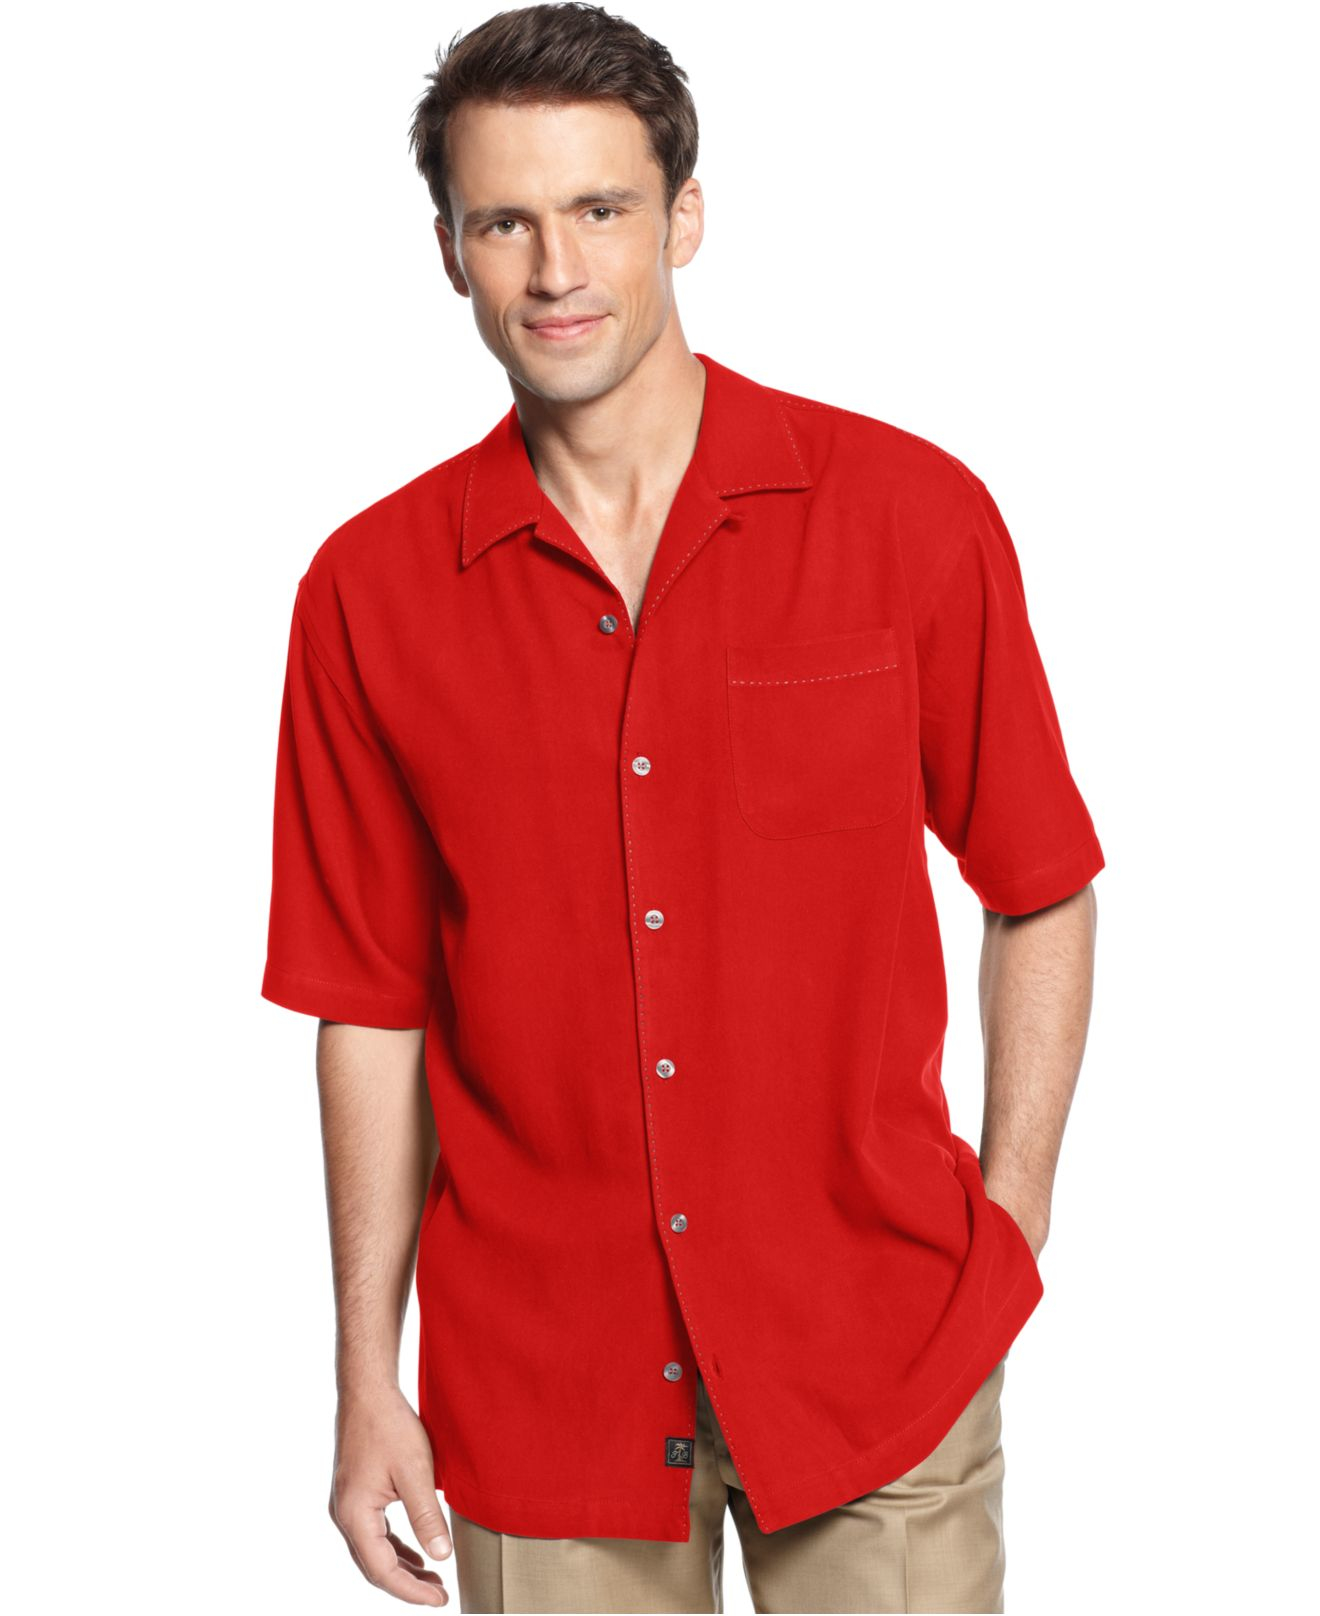 Lyst - Tommy Bahama Short-sleeve Catalina Twill Shirt in Red for Men